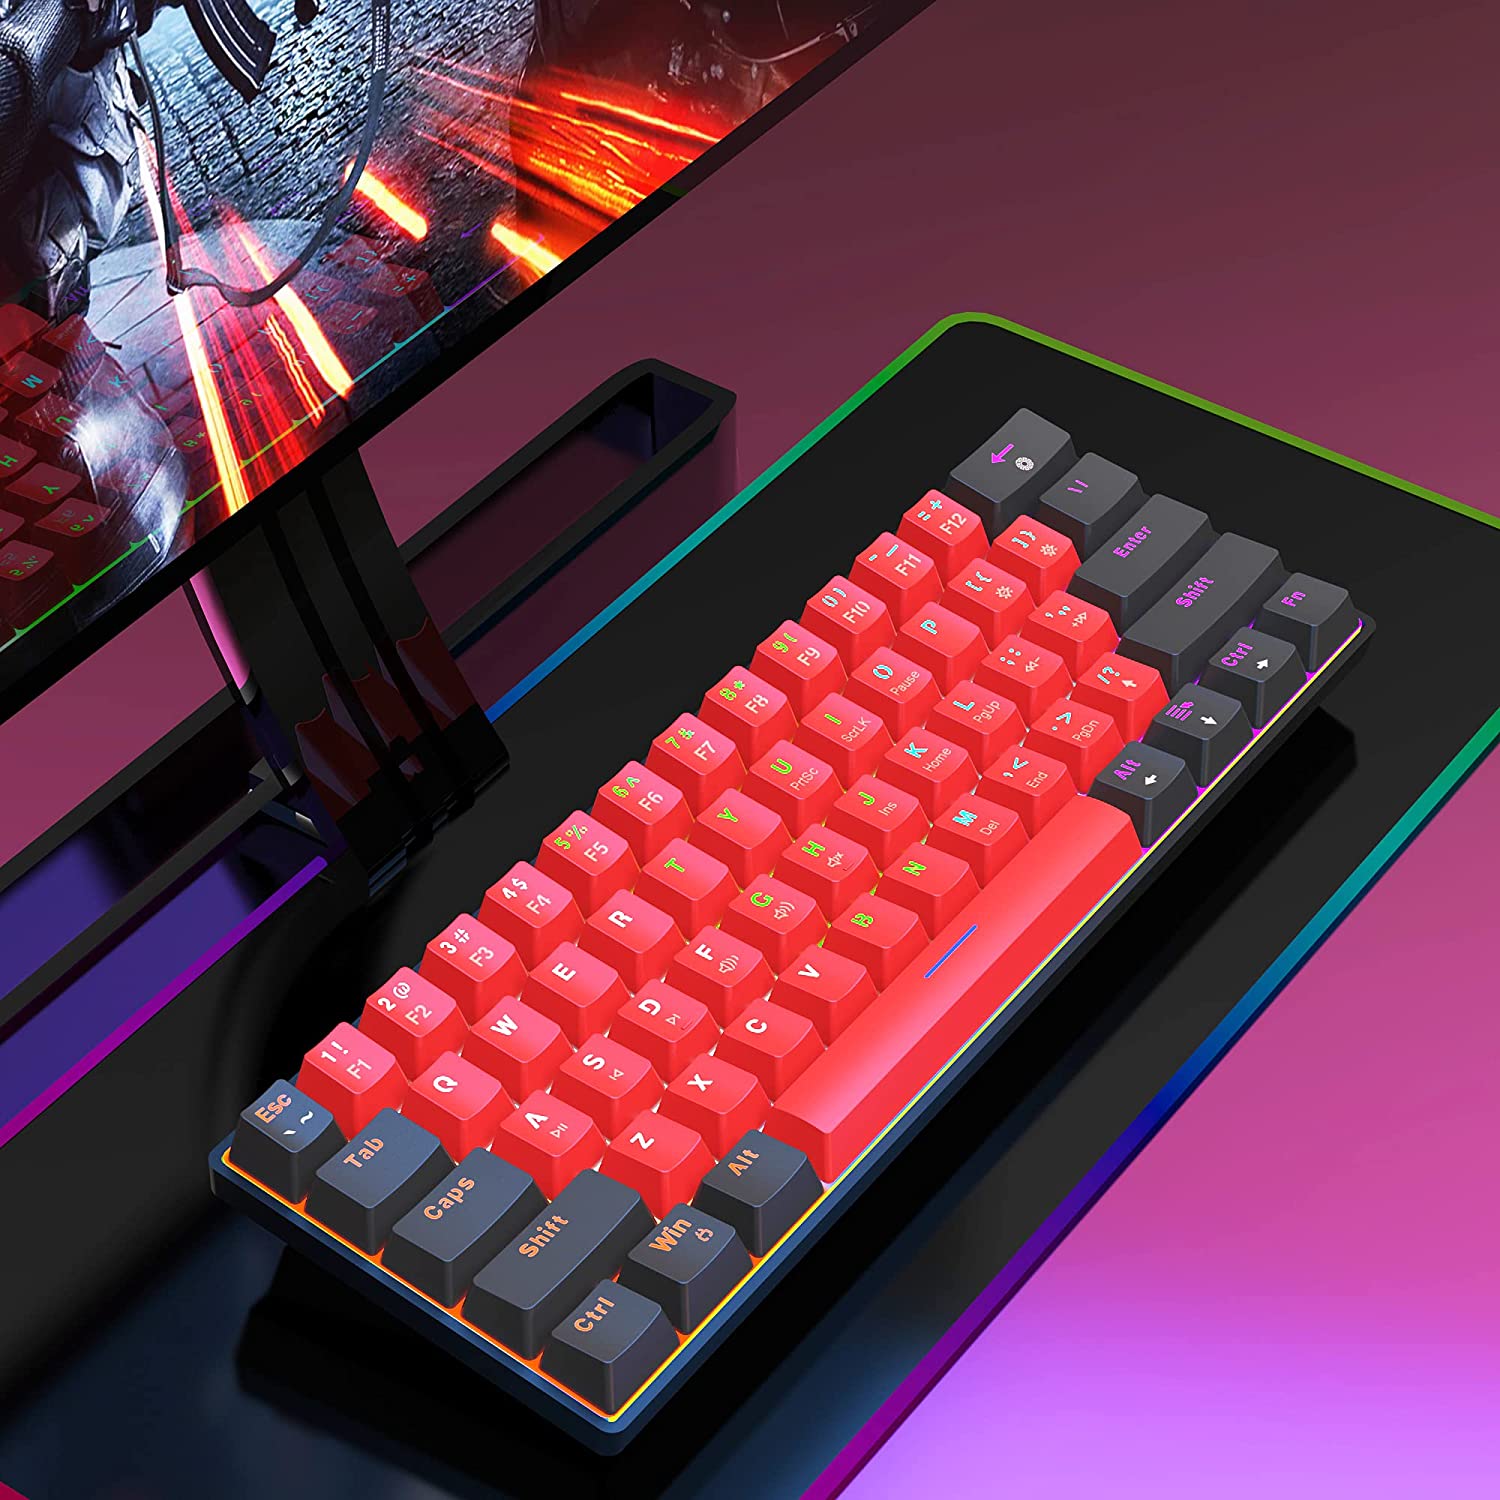 Snpurdiri 60% Wired Mechanical Keyboard , Black-Red, Red Switches